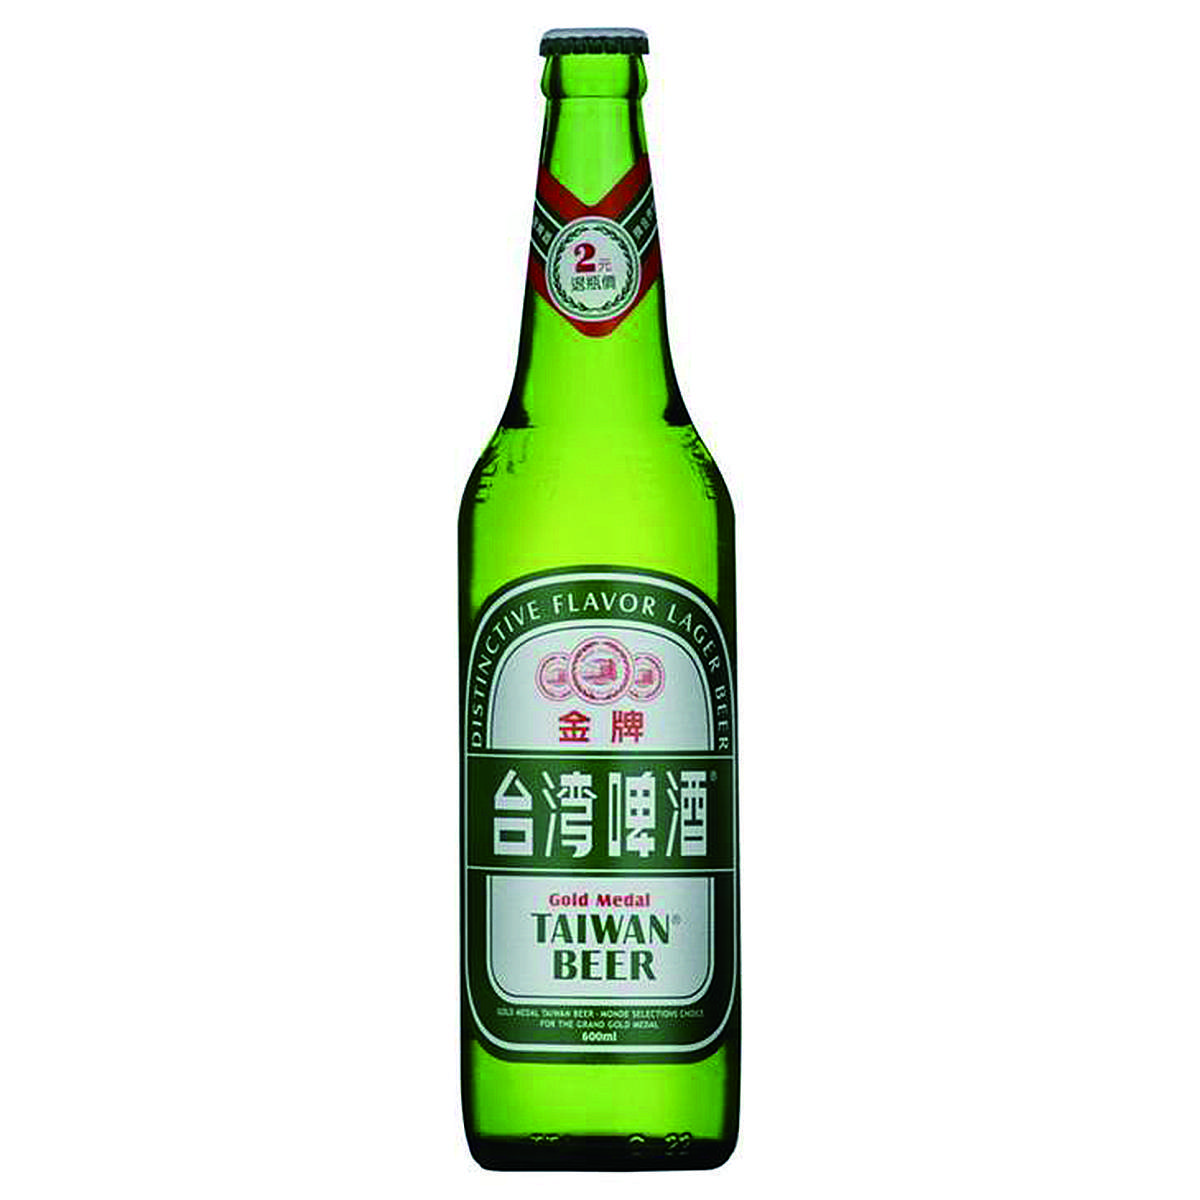 Taiwan Gold Medal Beer (Large)